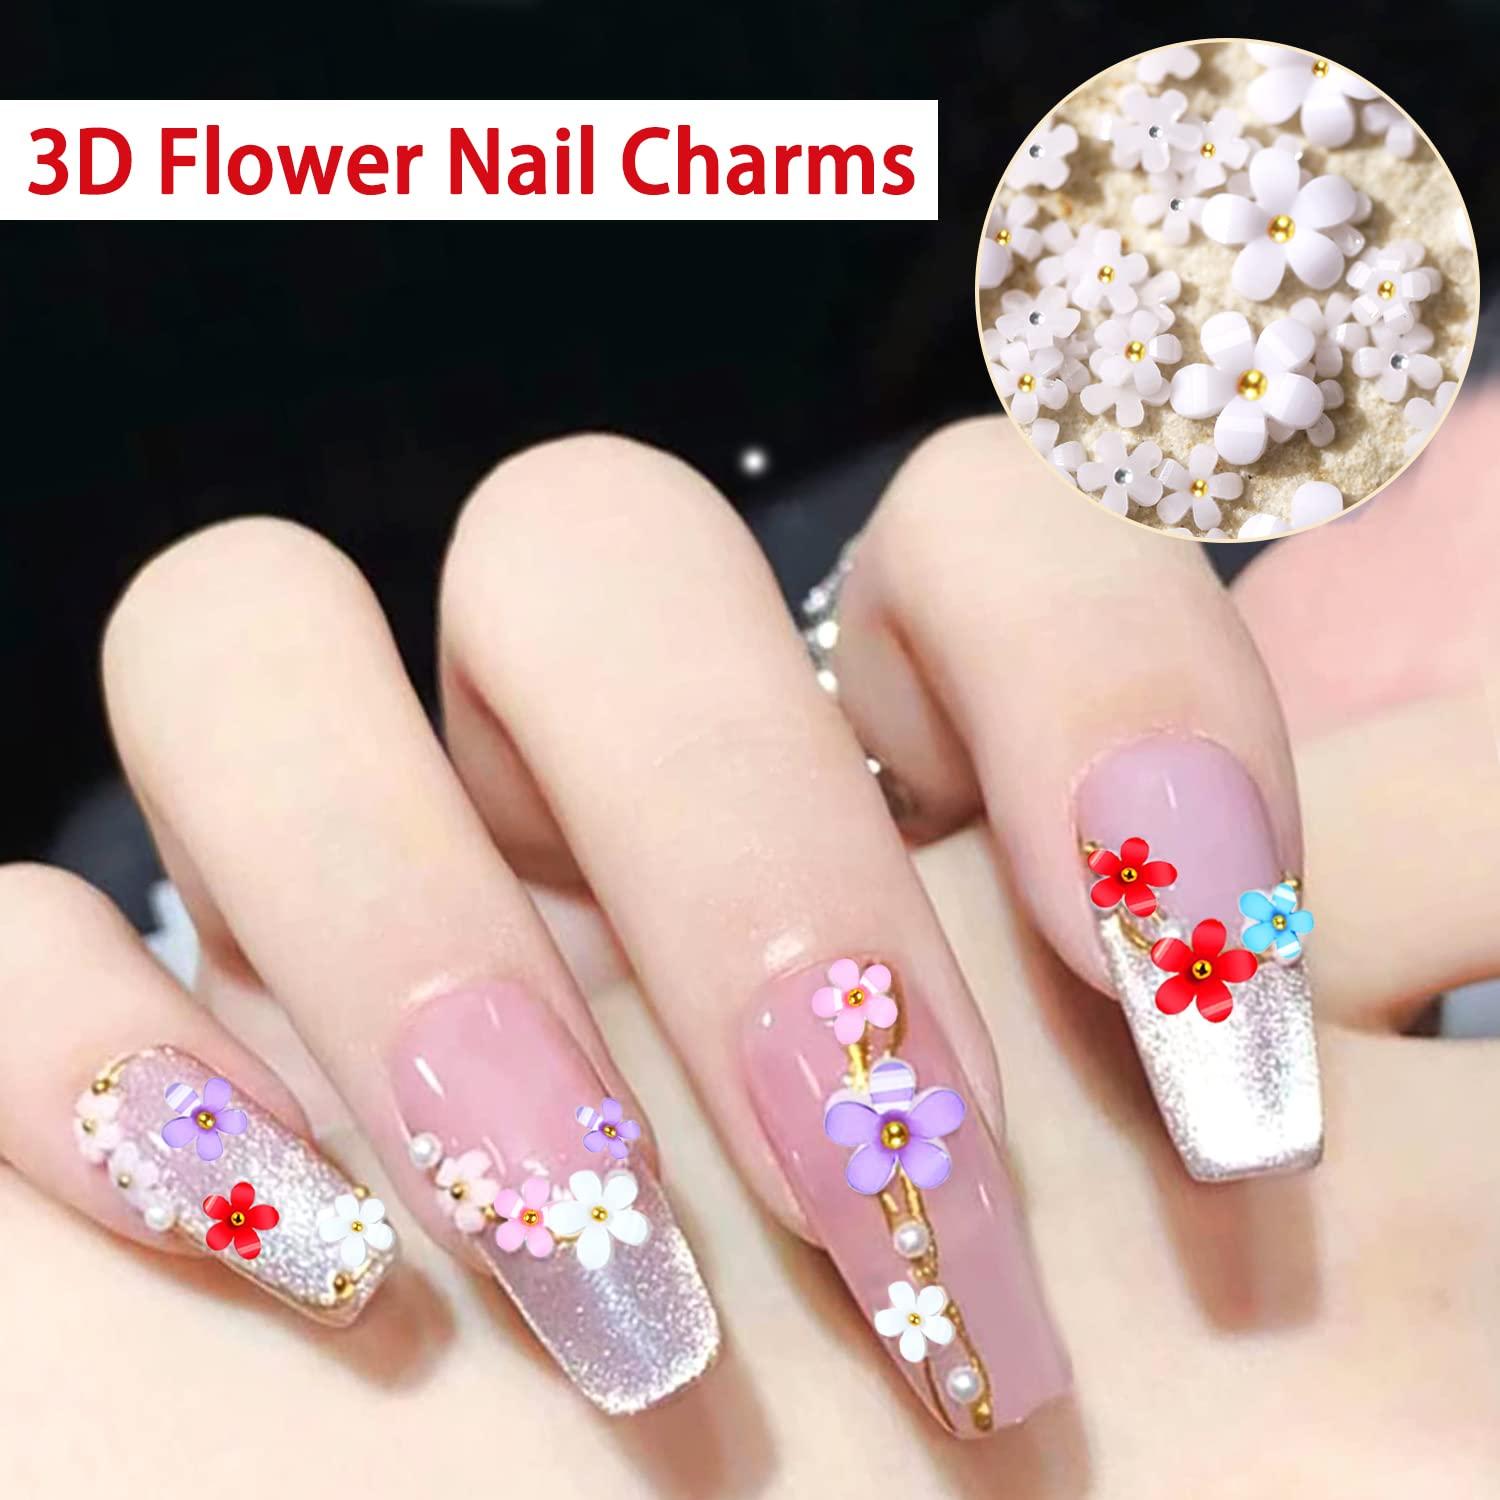 Flowers Nail Charms Decorations Acrylic Pink White Mixed Petals